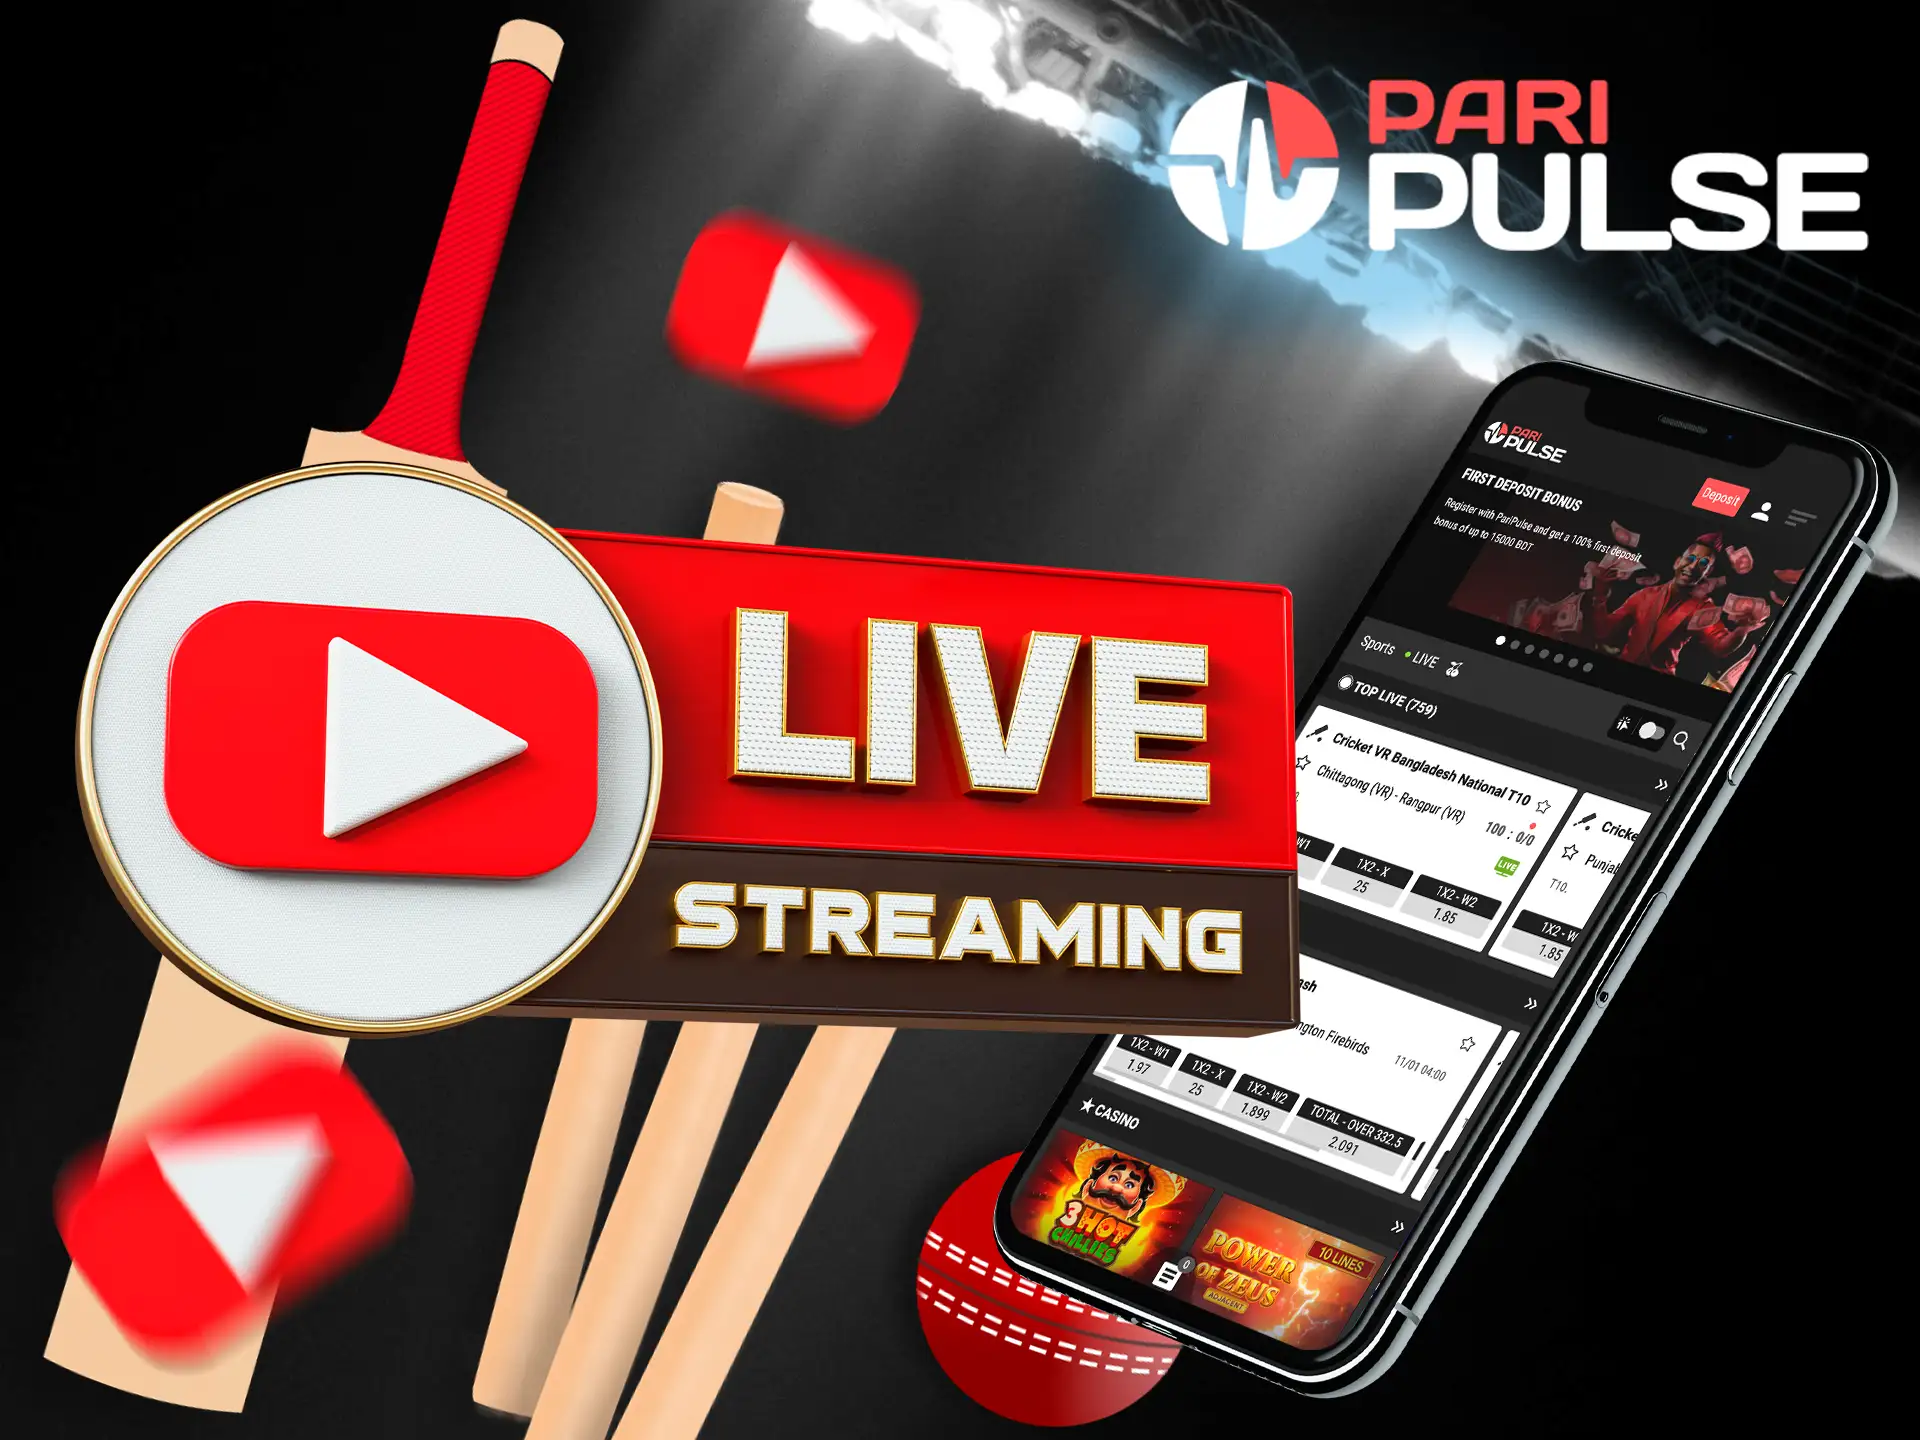 Enjoy live event broadcasts directly on the PariPulse website while placing bets during the match.